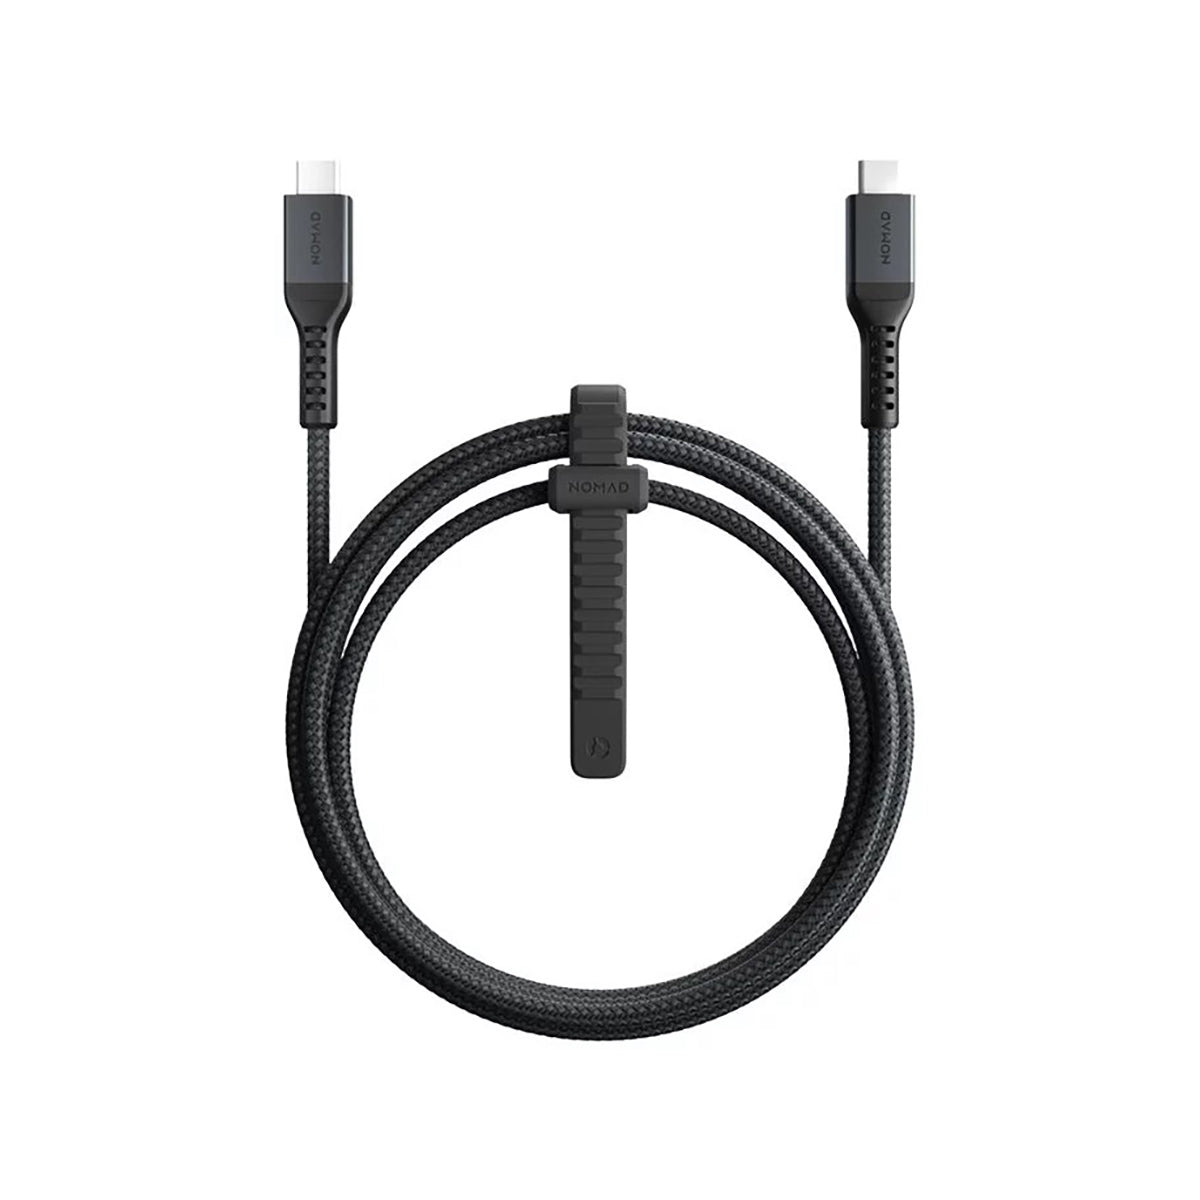 NOMAD Kevlar V2 - 1.5M USB C Cable For C Type Charger